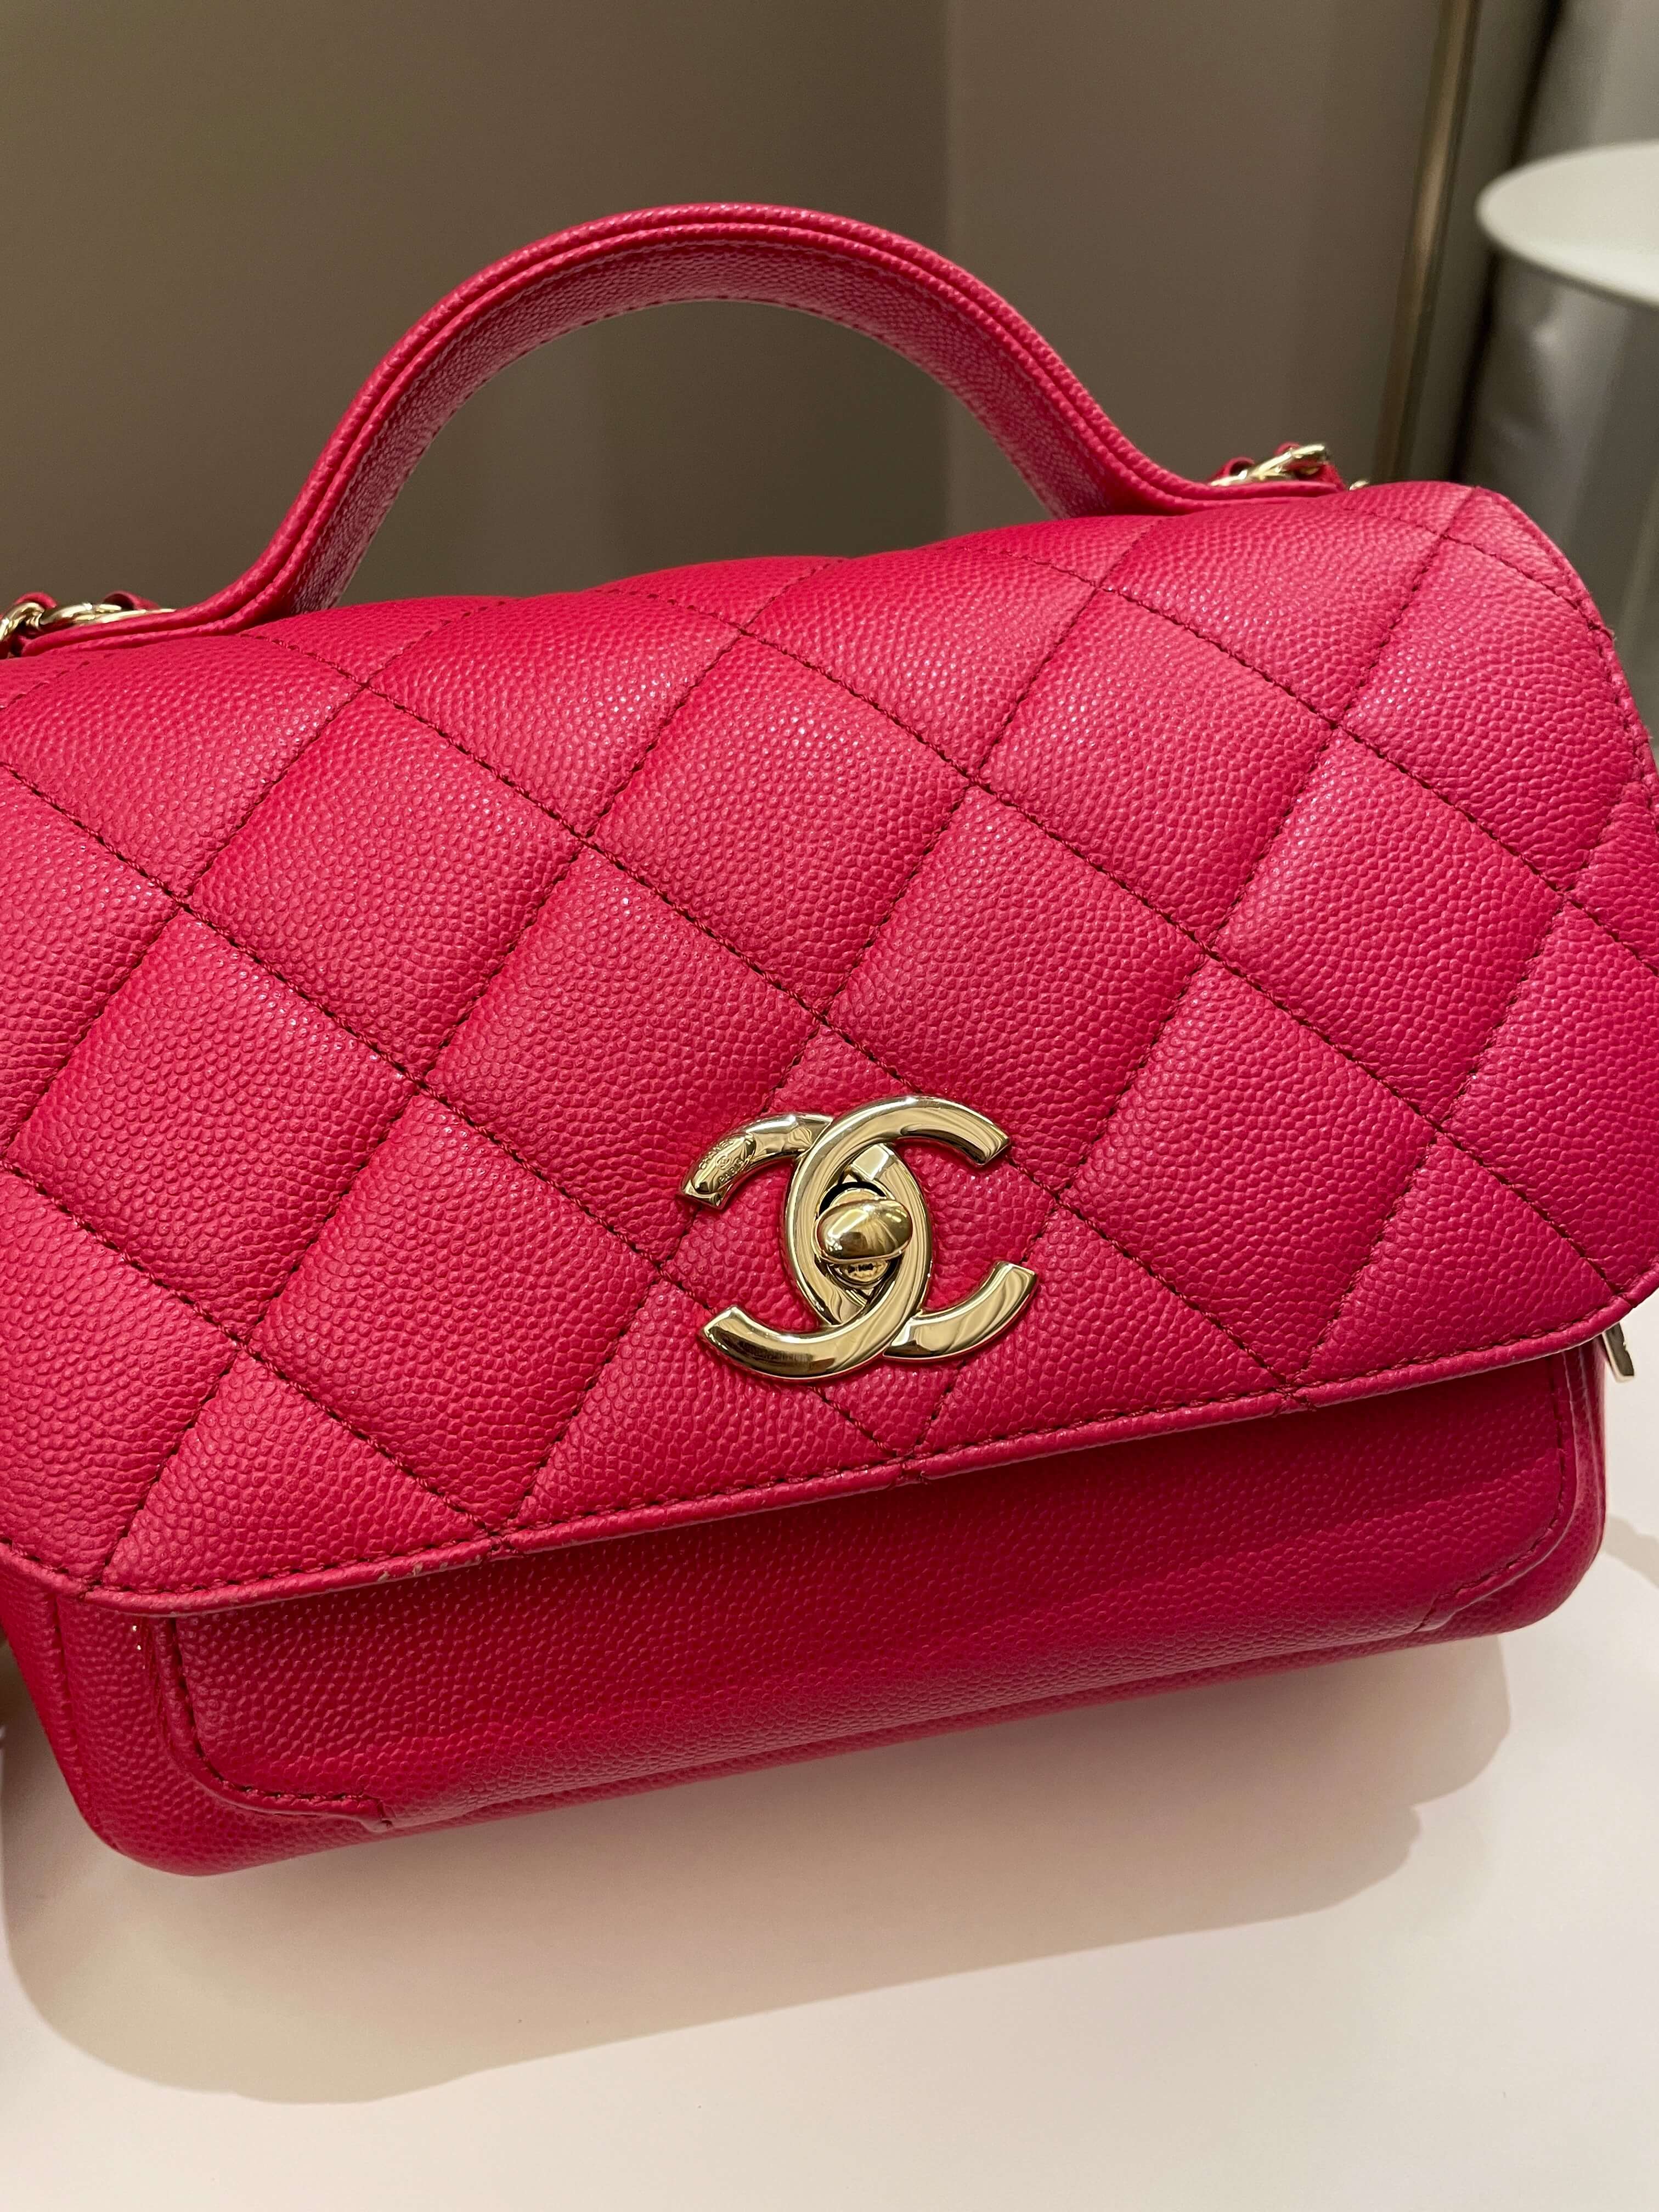 Chanel Red Caviar Leather Small Business Affinity Flap Bag Chanel